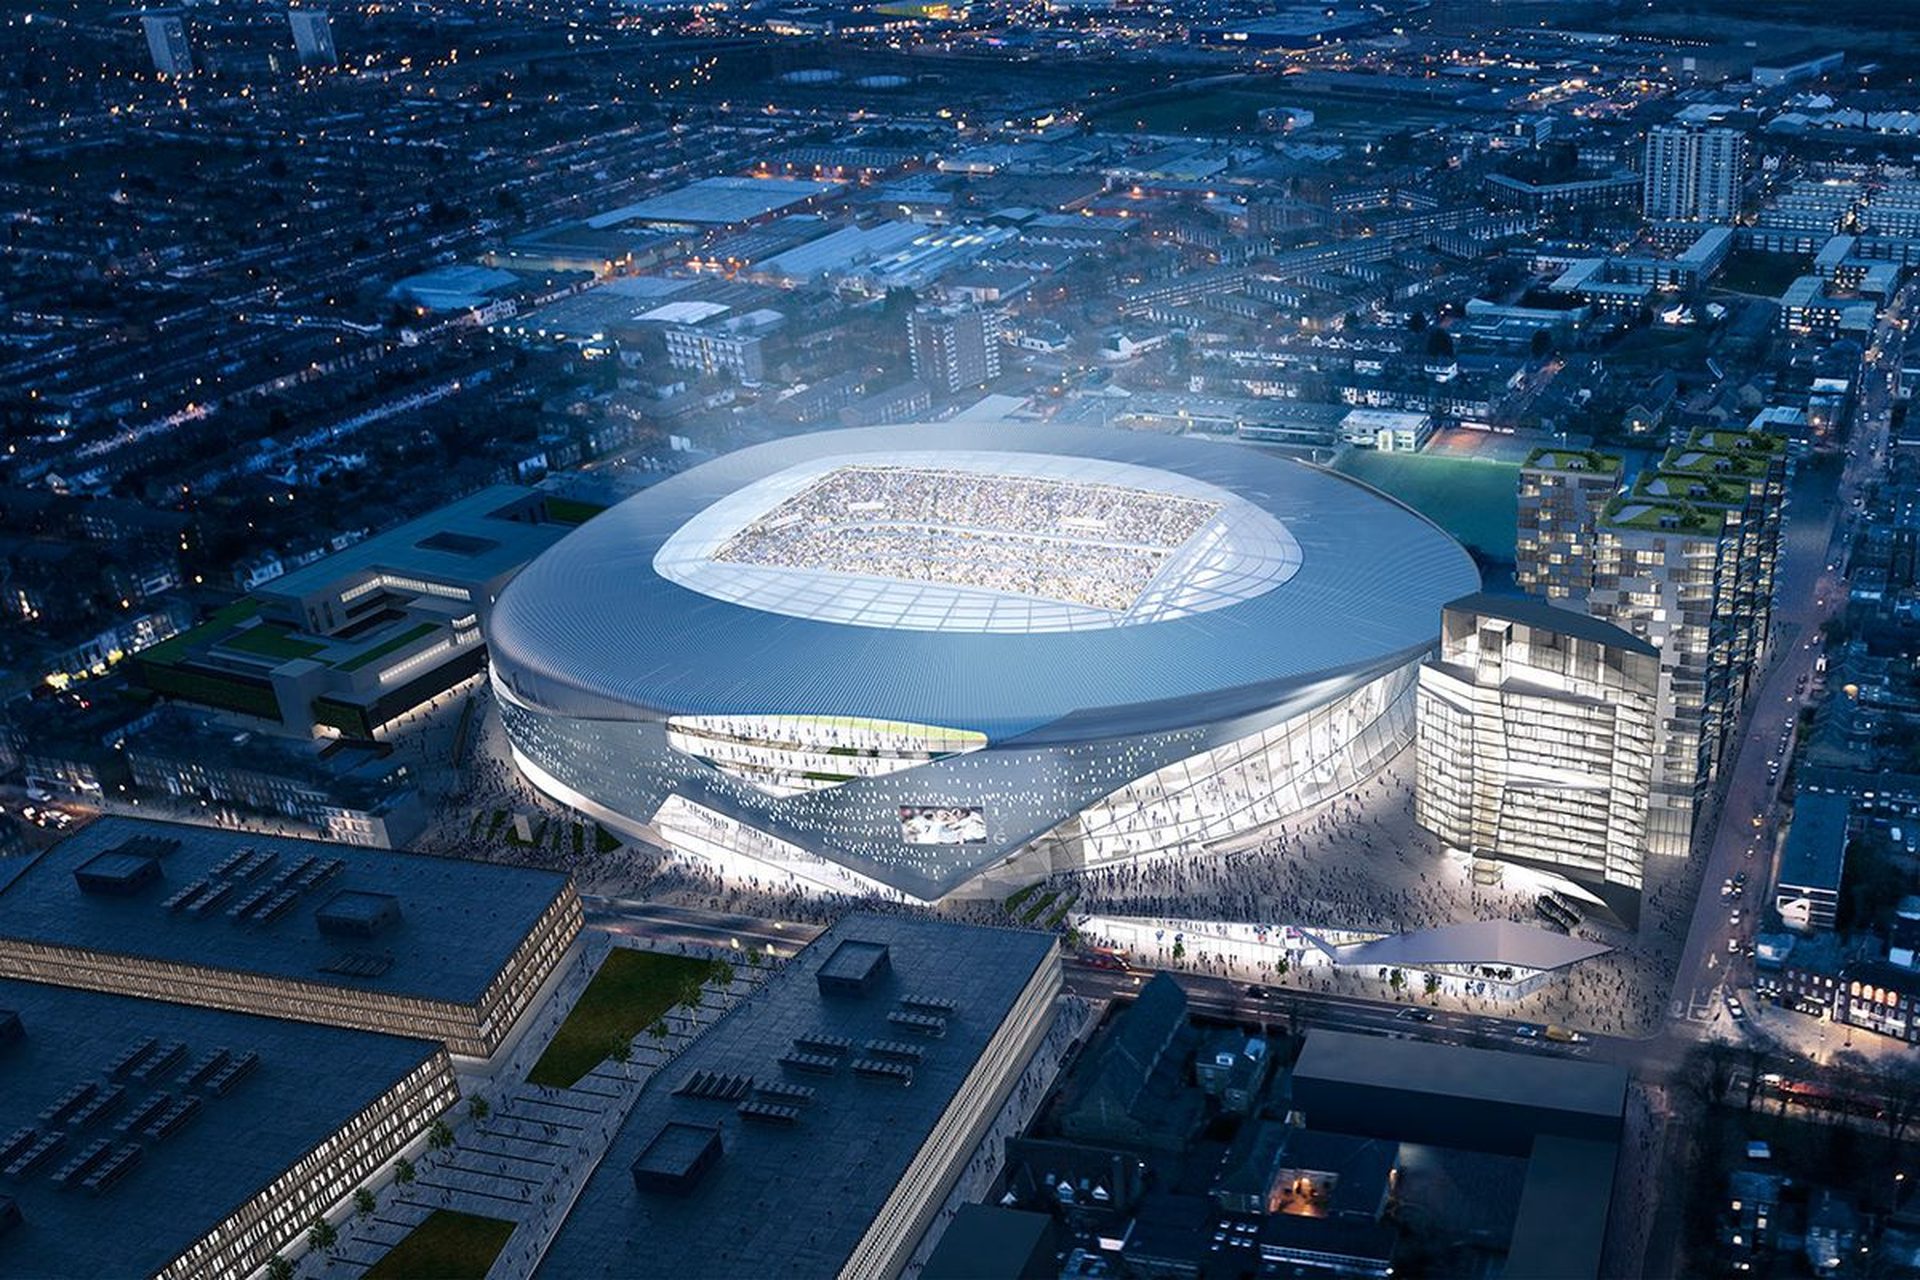 Google in talks with Tottenham for Over £1bn stadium naming rights deal